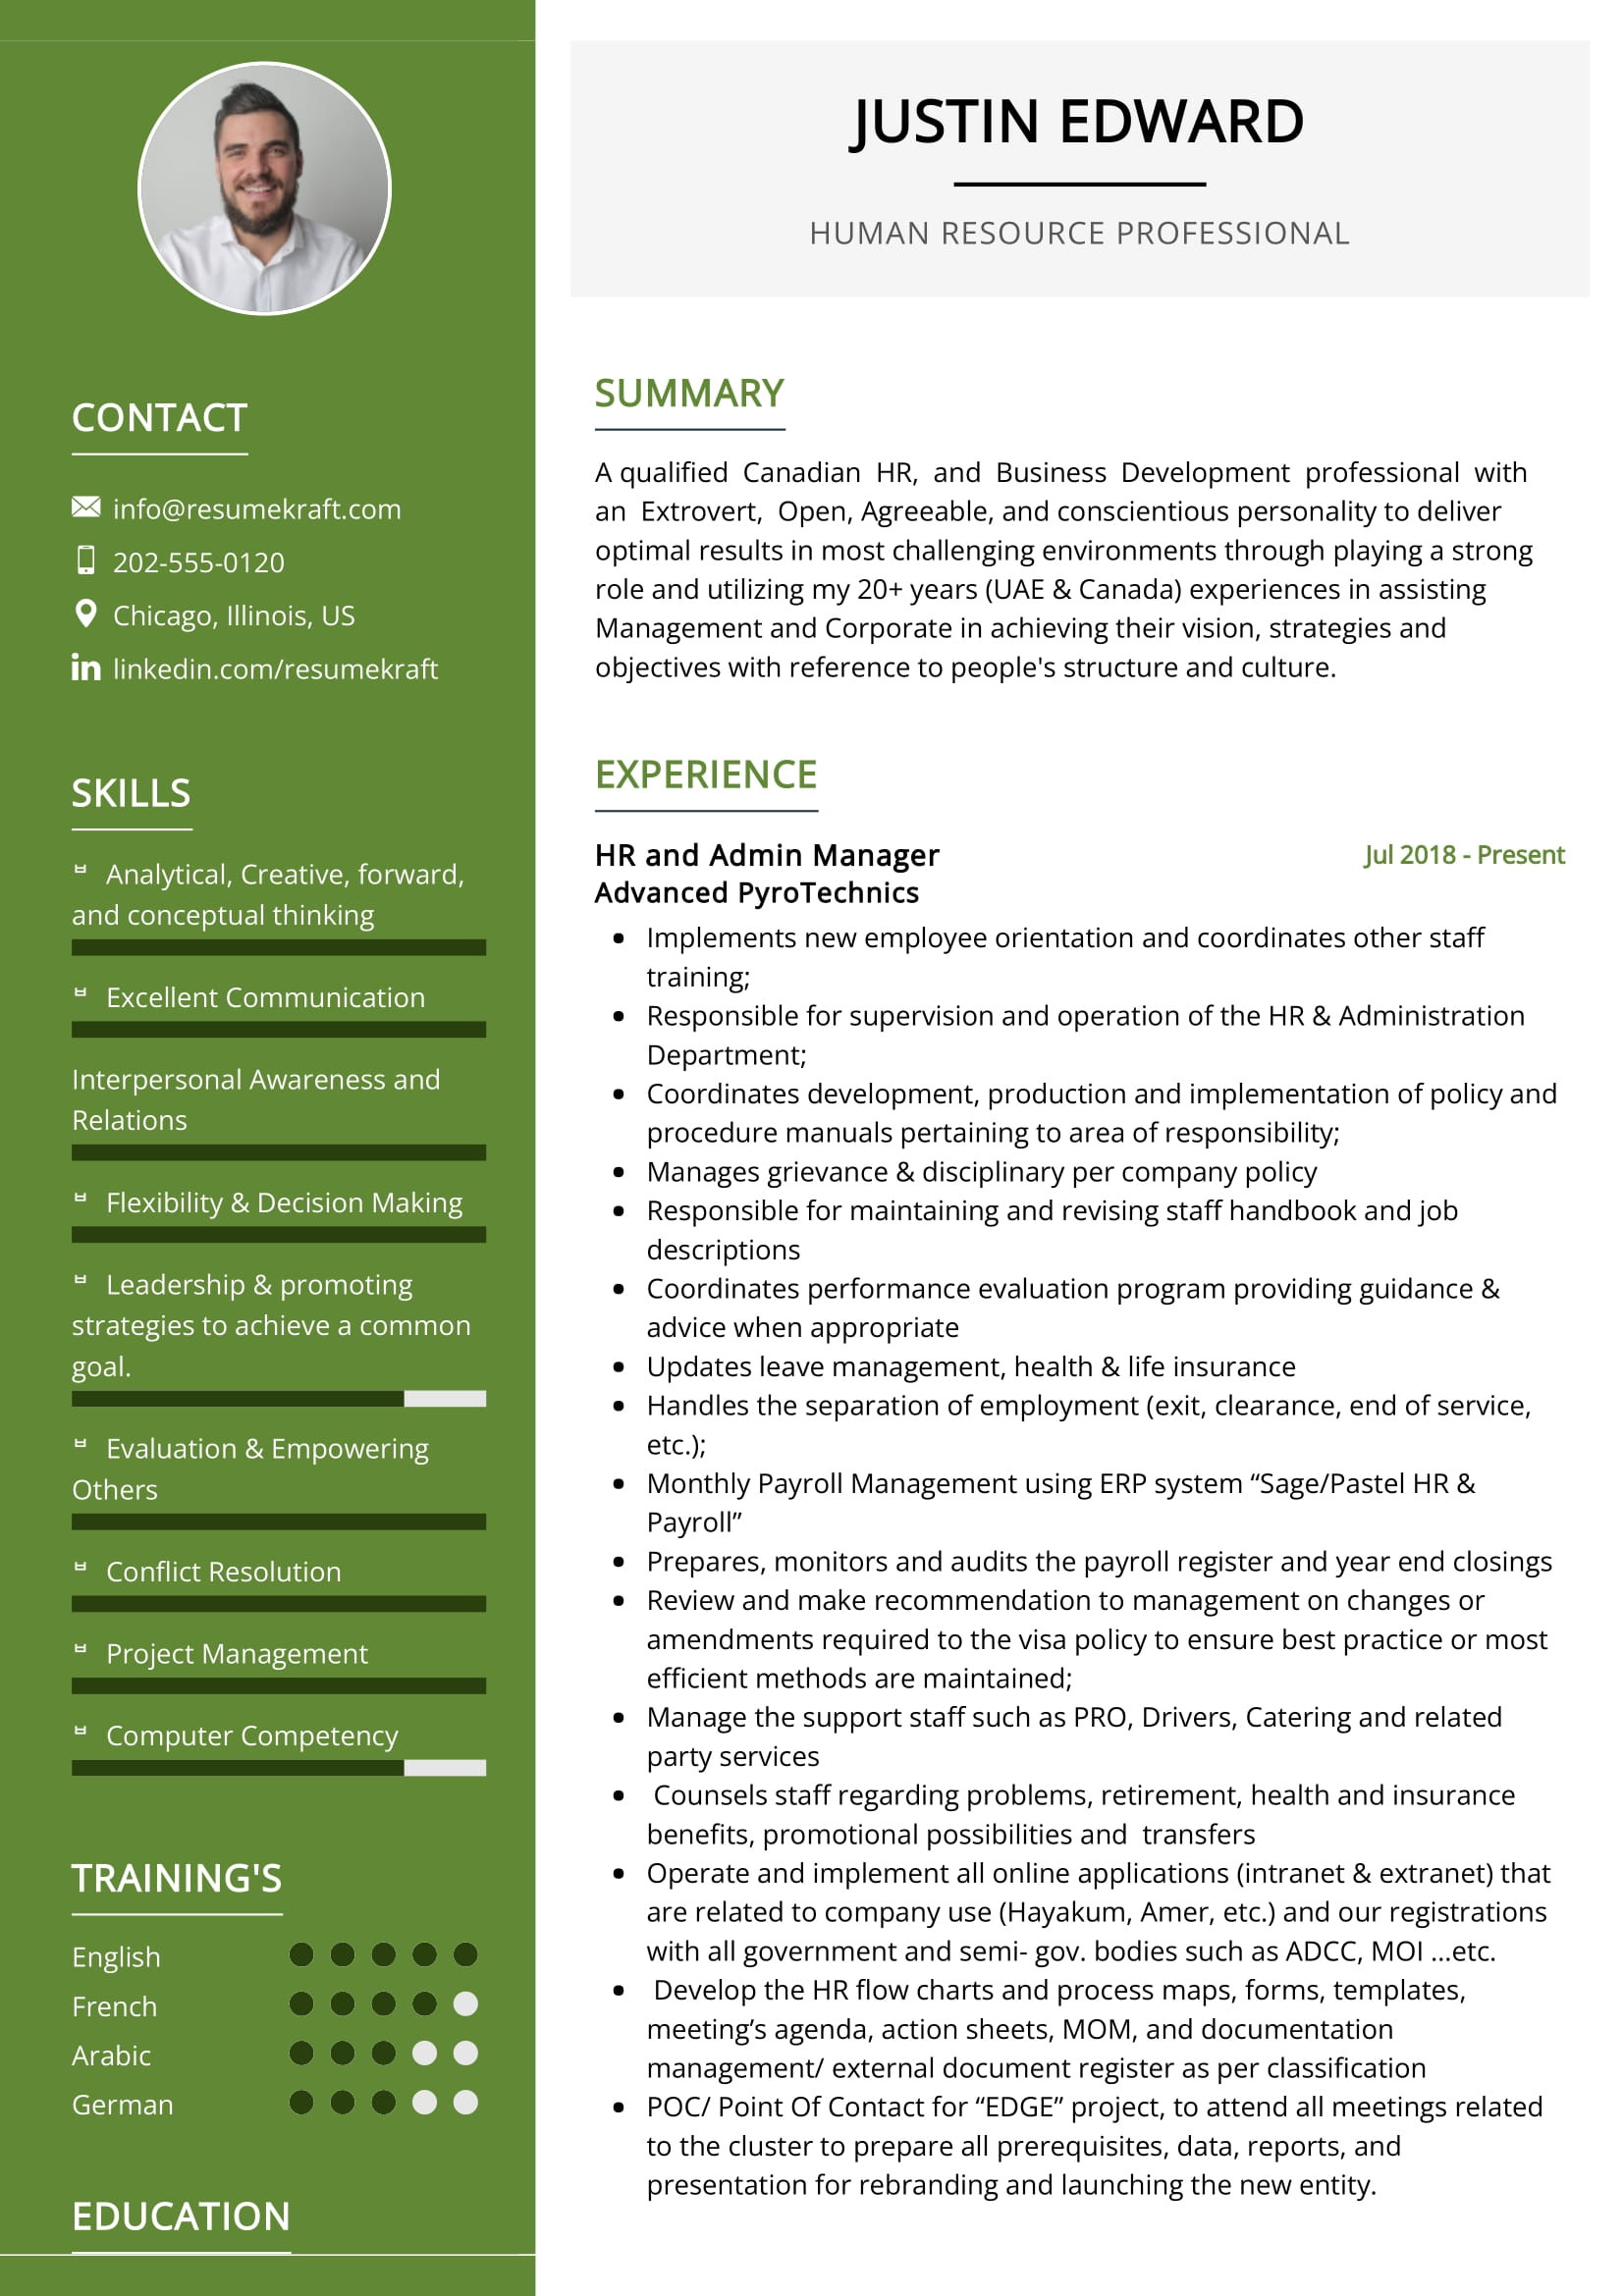 Global Human Resources Specialist Resume Samples Human Resource Professional Resume Sample 2022 Writing Tips …